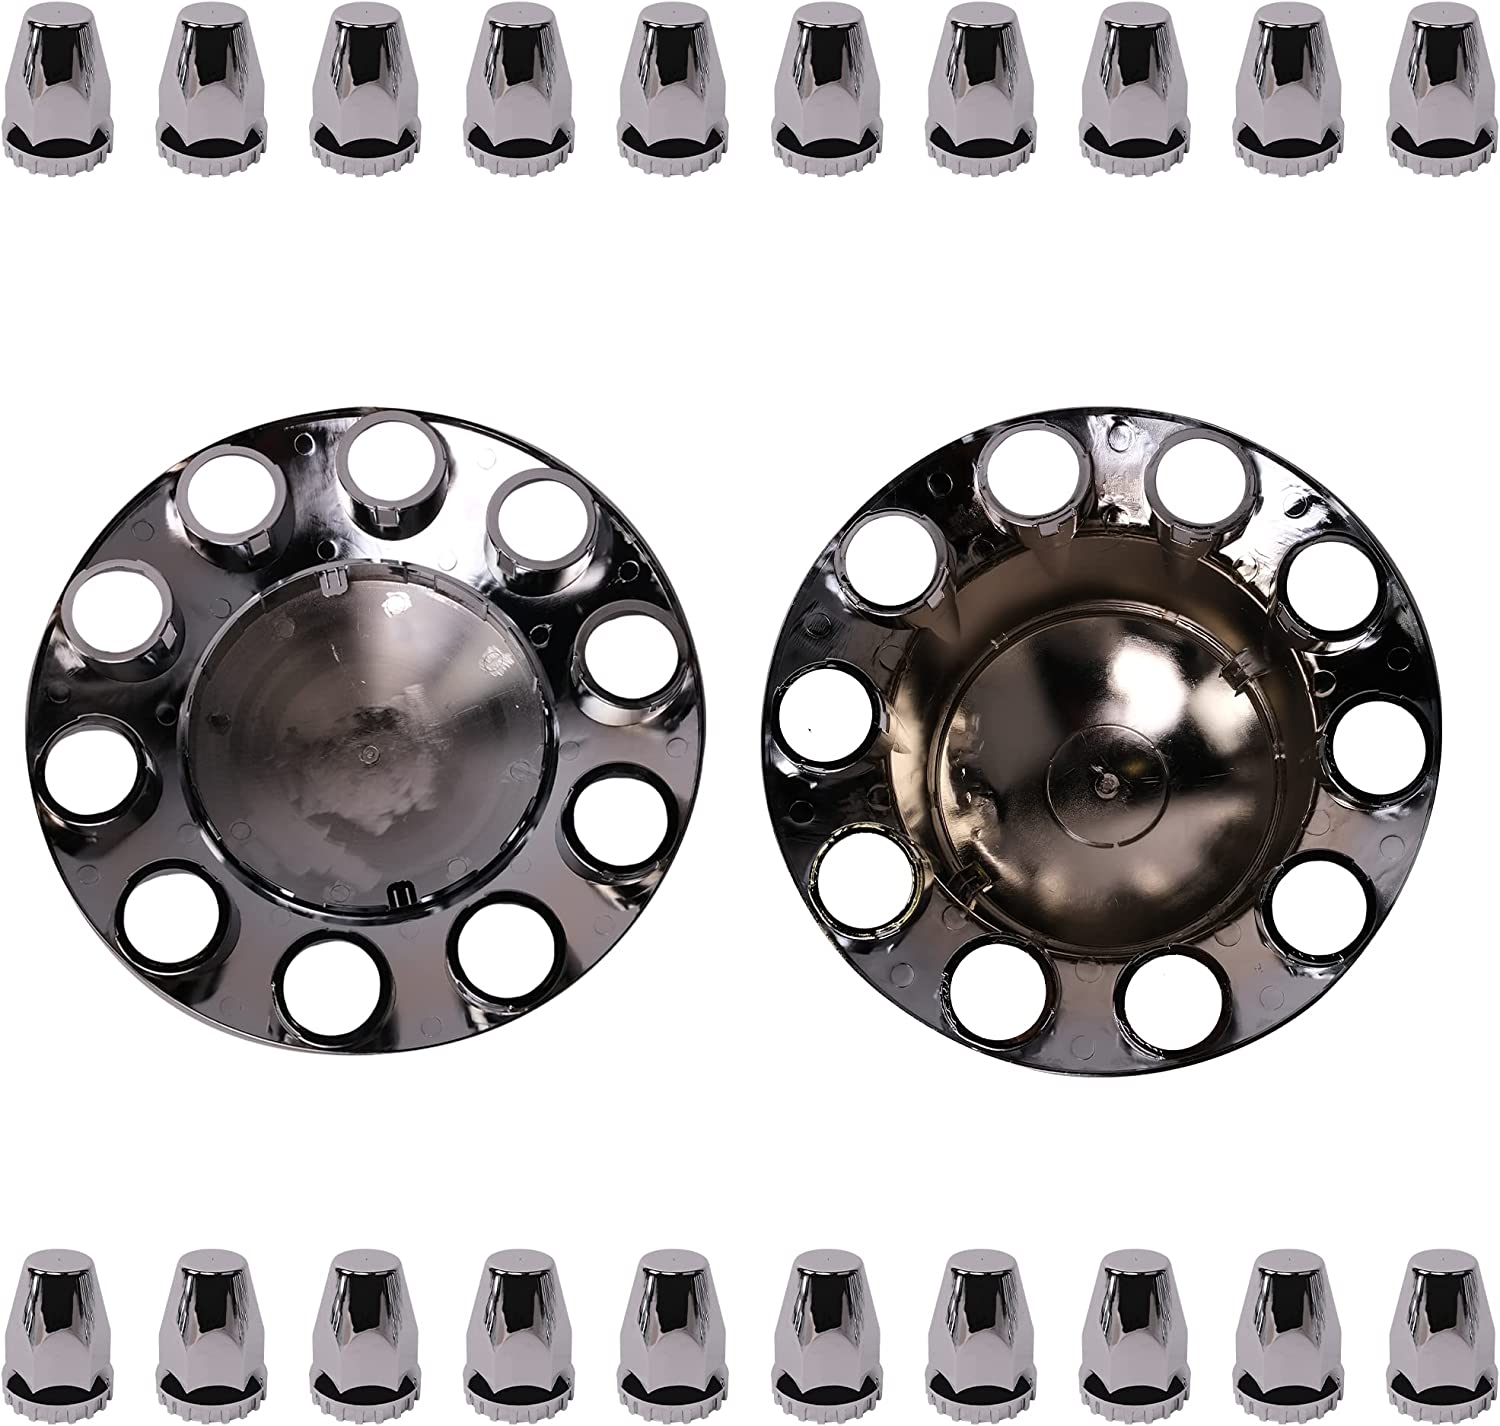 6 Complete Chrome Axle Hub Cover Kit with Standard Lug Nut Covers